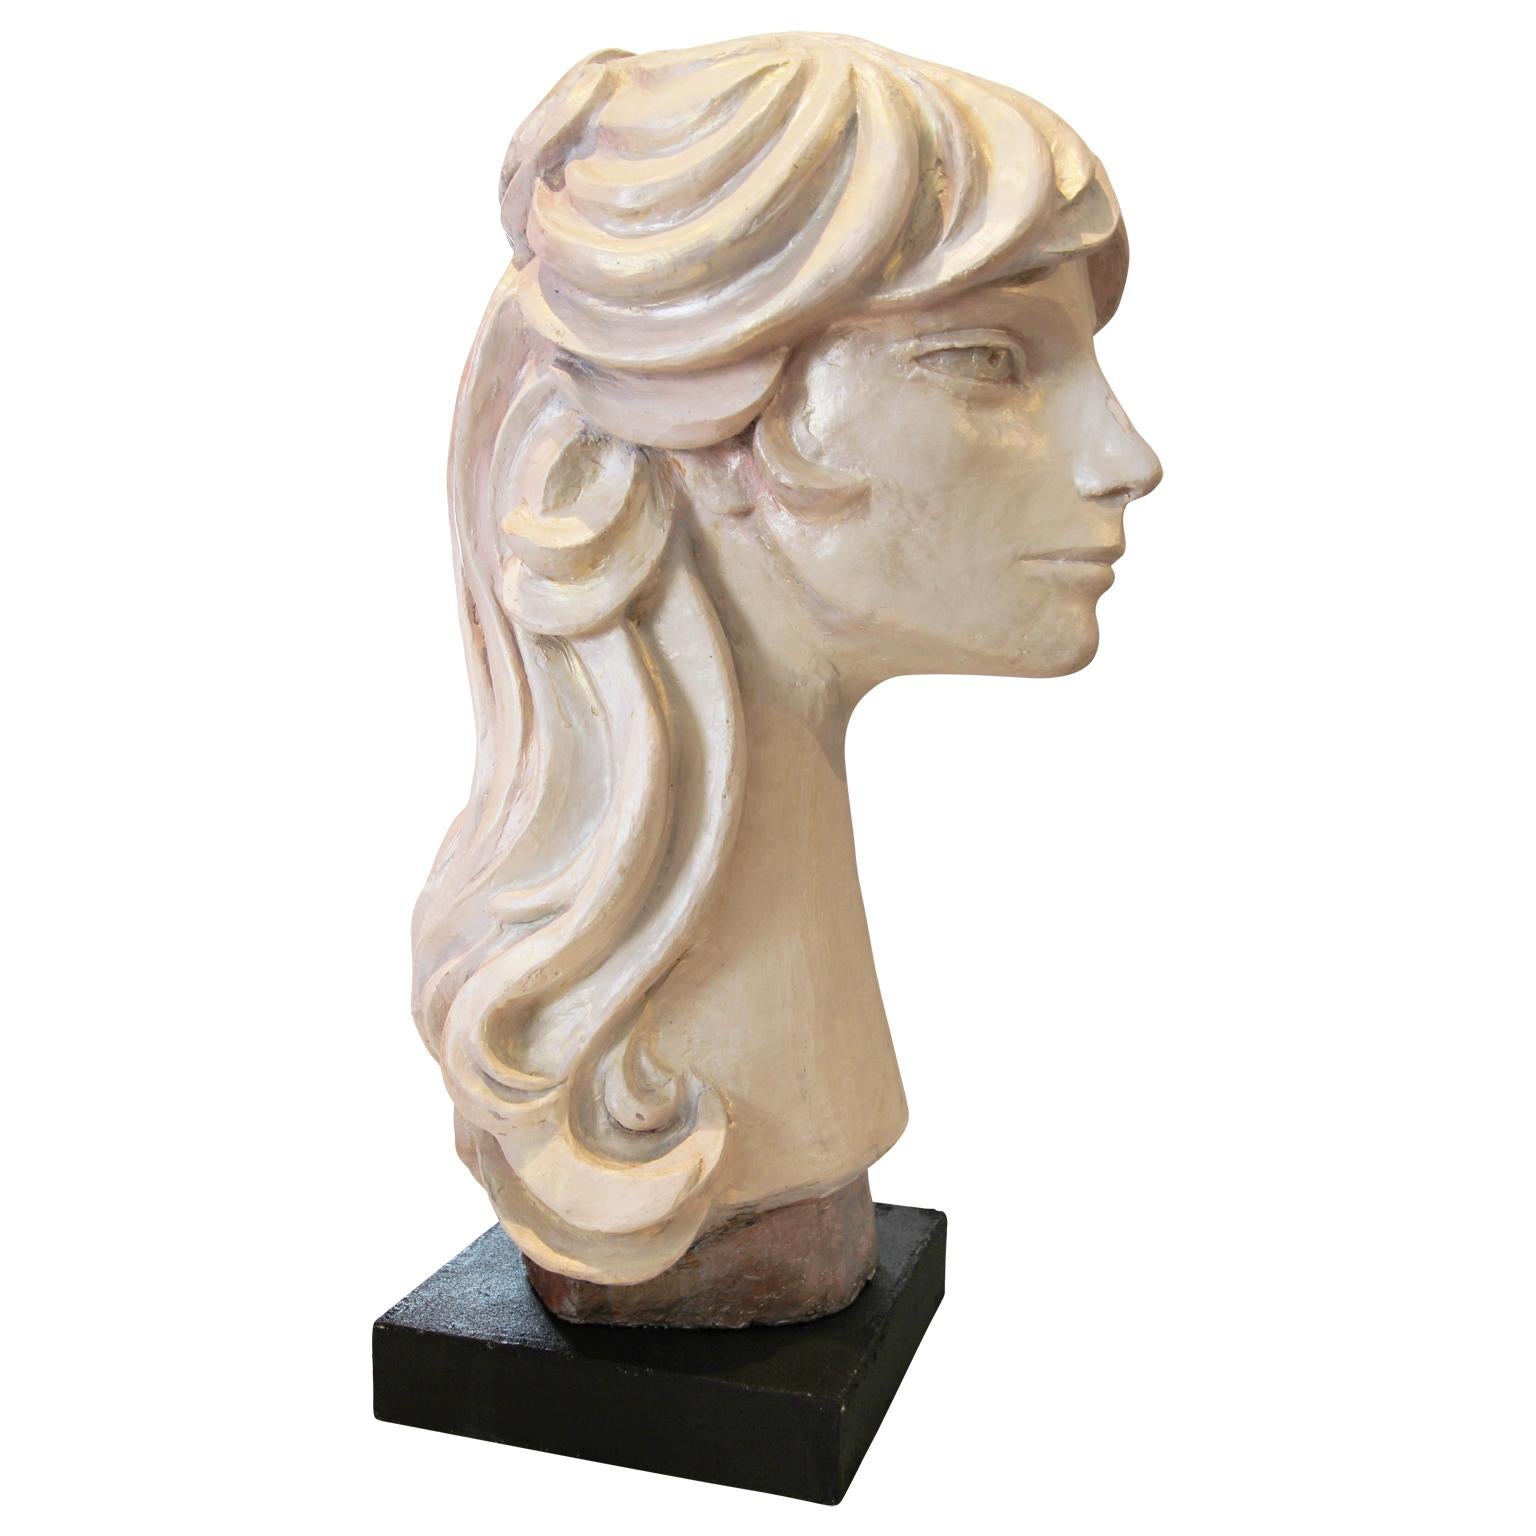 Modern Abstract Cast Stone Female Bust Portrait Sculpture of Julie Burrows - Brown Abstract Sculpture by David Adickes